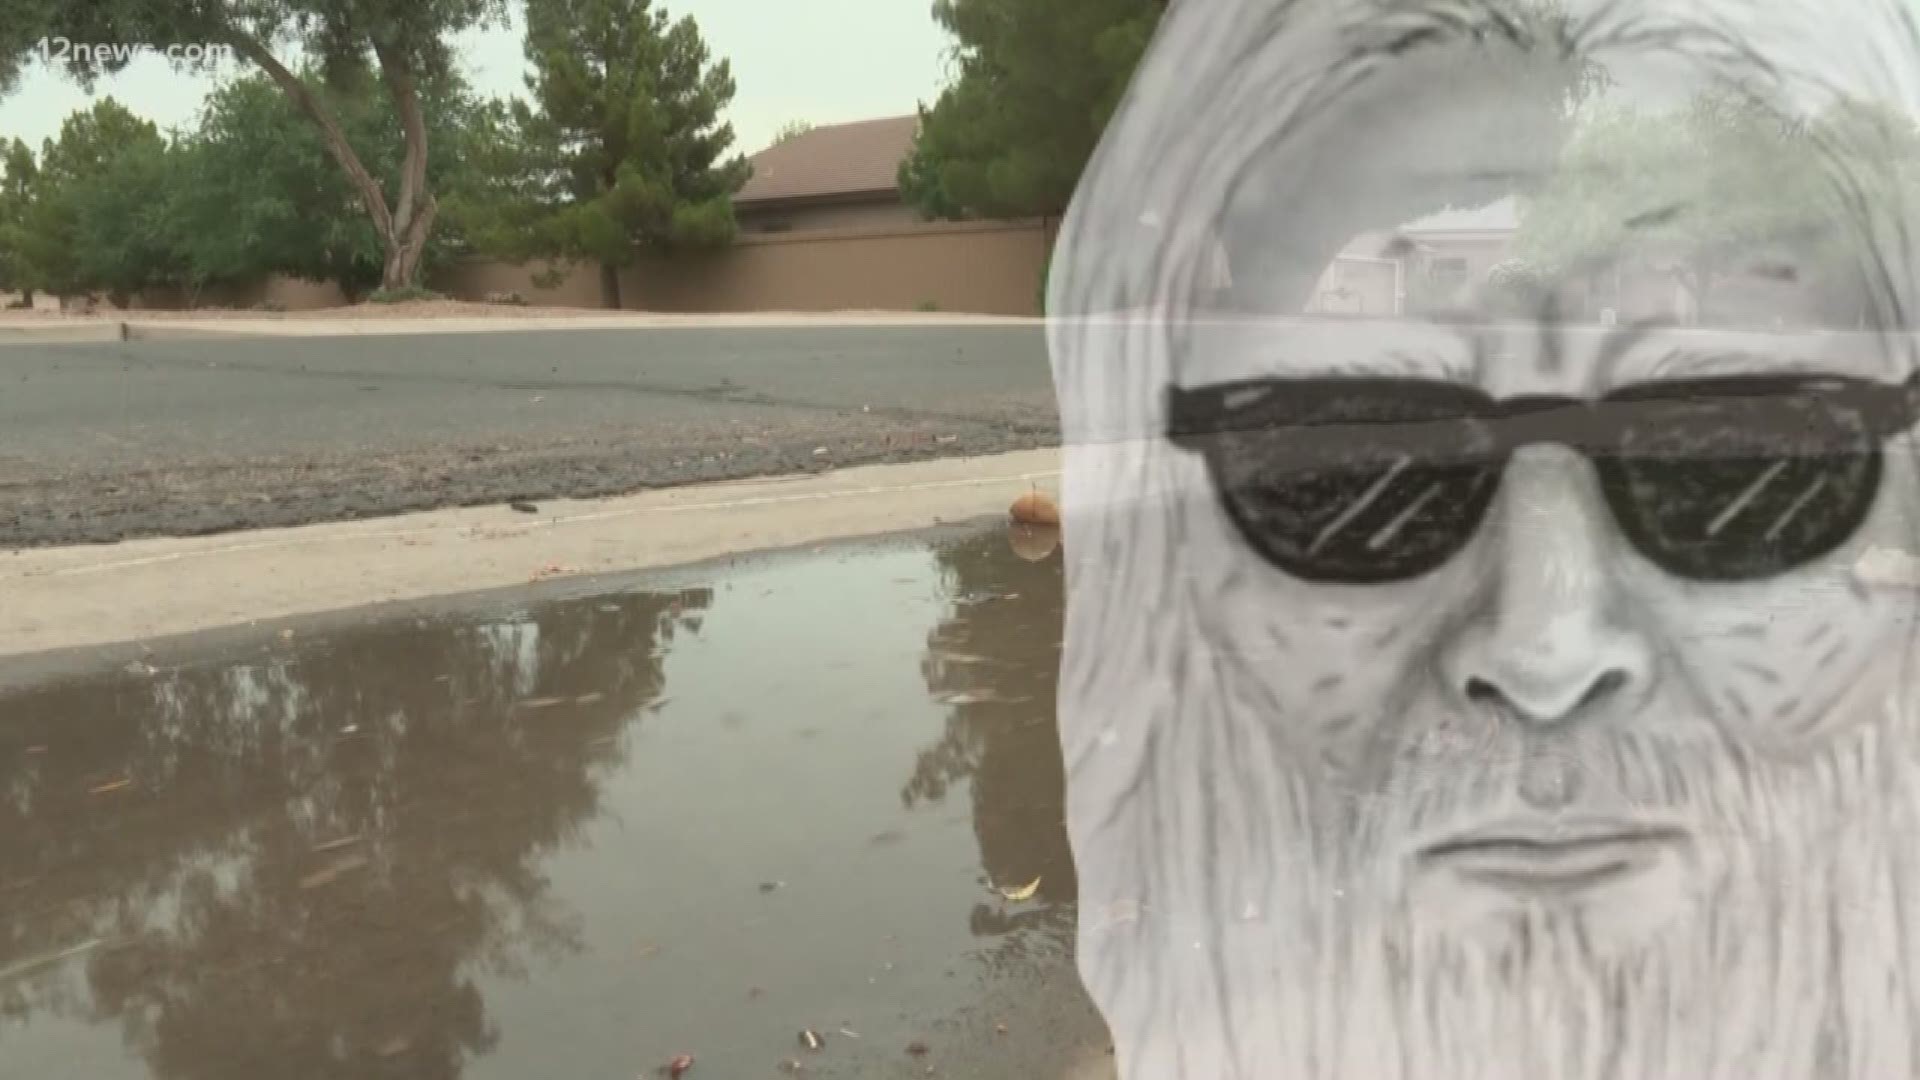 A Gilbert neighborhood is on edge after a 10-year-old girl was approached by a man who tried to lure her into his van.